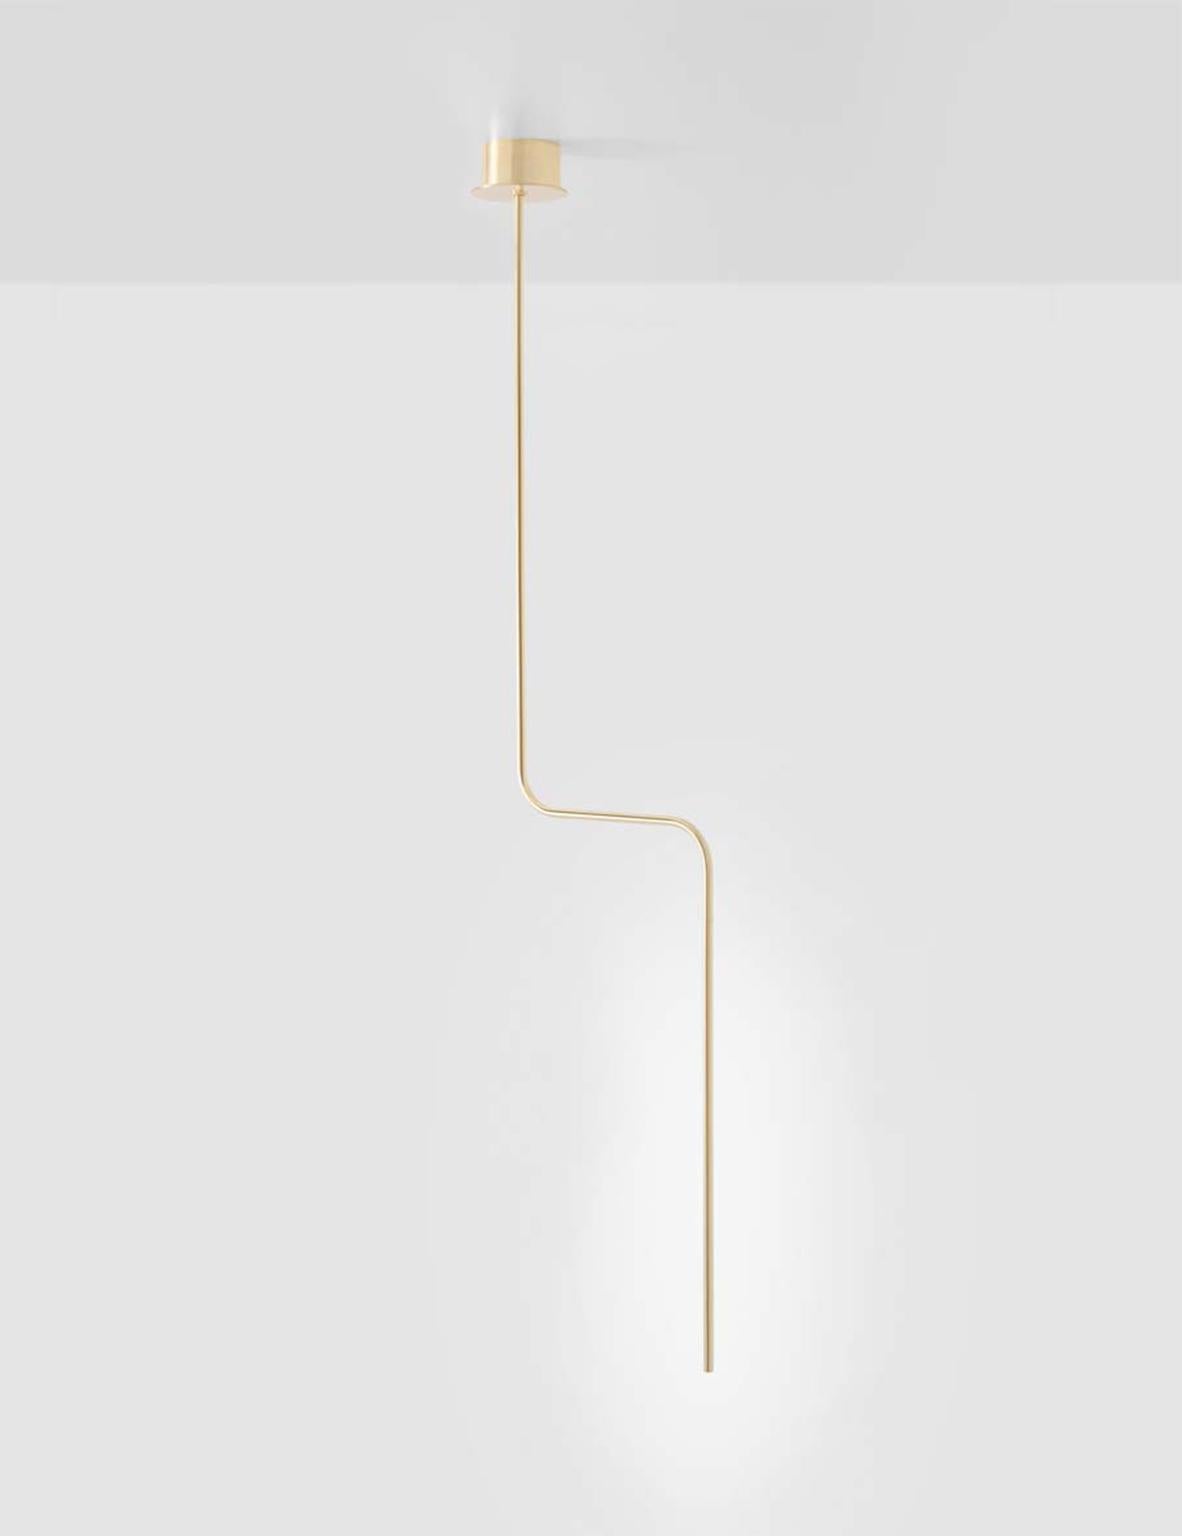 Sem Gold collection, ceiling lamp in polished or fine brushed tubular brass with double joint. Different sizes and compositions : H 110/125/155/175 cm.
Horizontal single arm length 20 cm.
Lamp type LED 6W - 3000°K Voltage 220-240 V 50-60 HZ COS